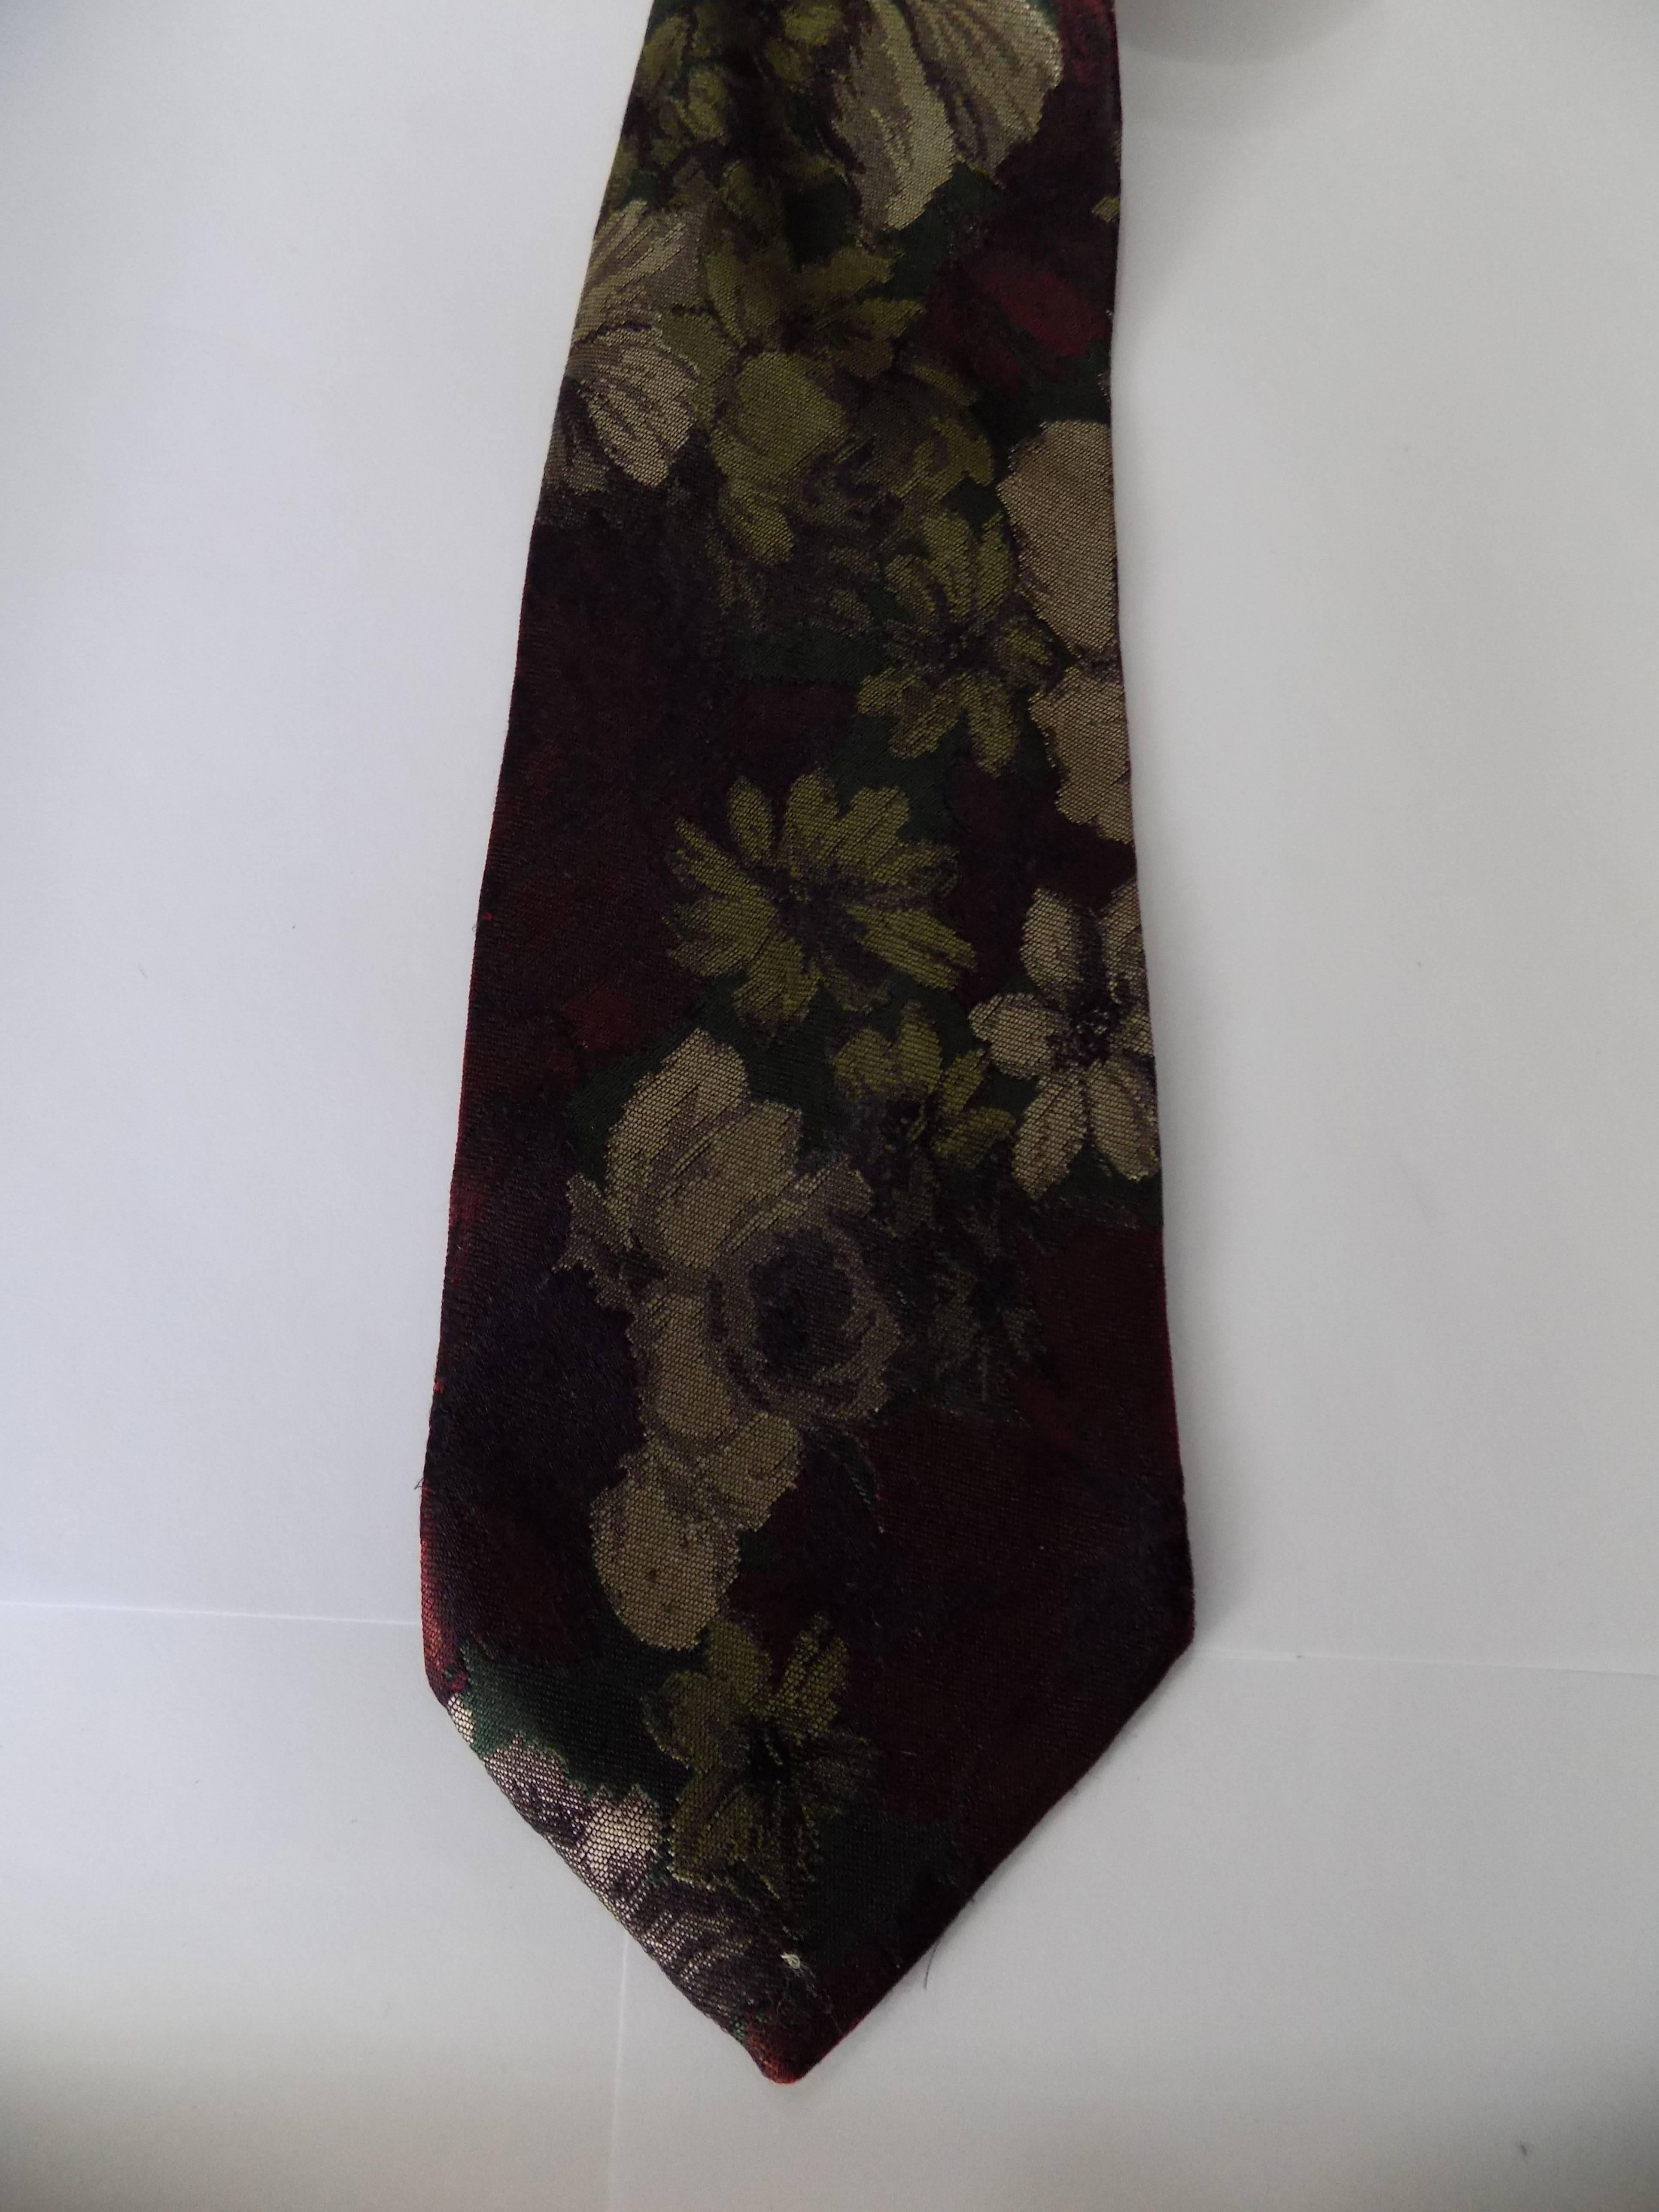 1980s Moschino multicolour tie

totally made in italy

100% Silk